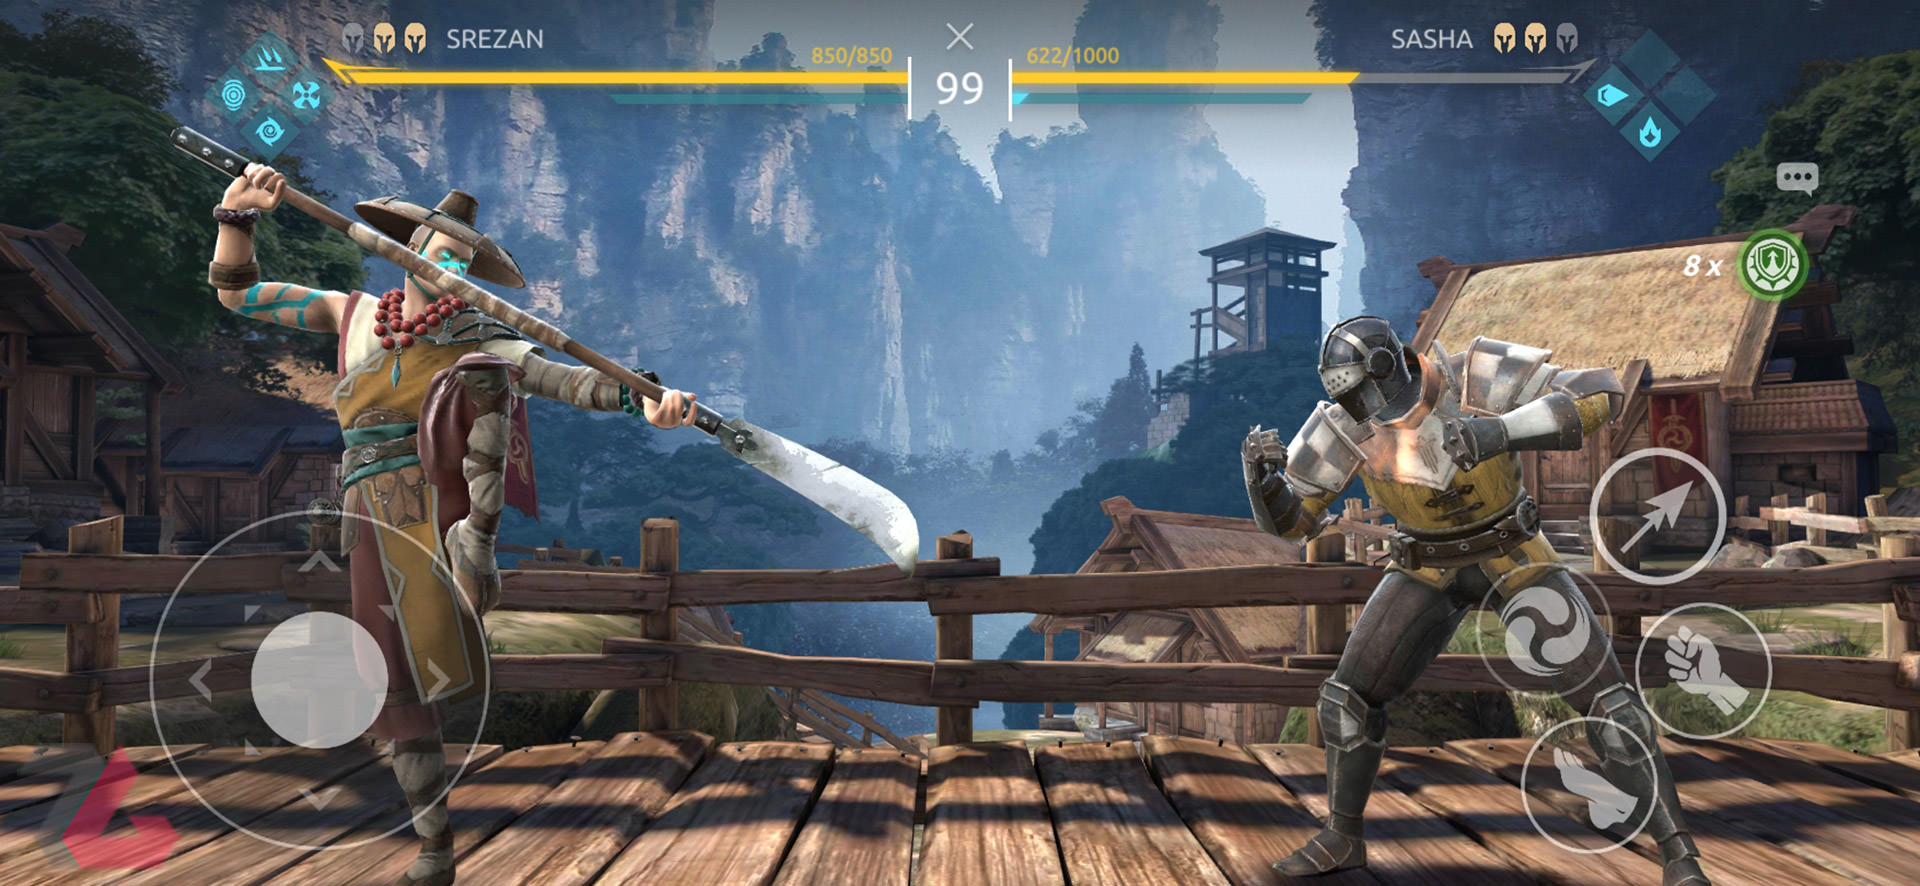 download download shadow fight 4 arena